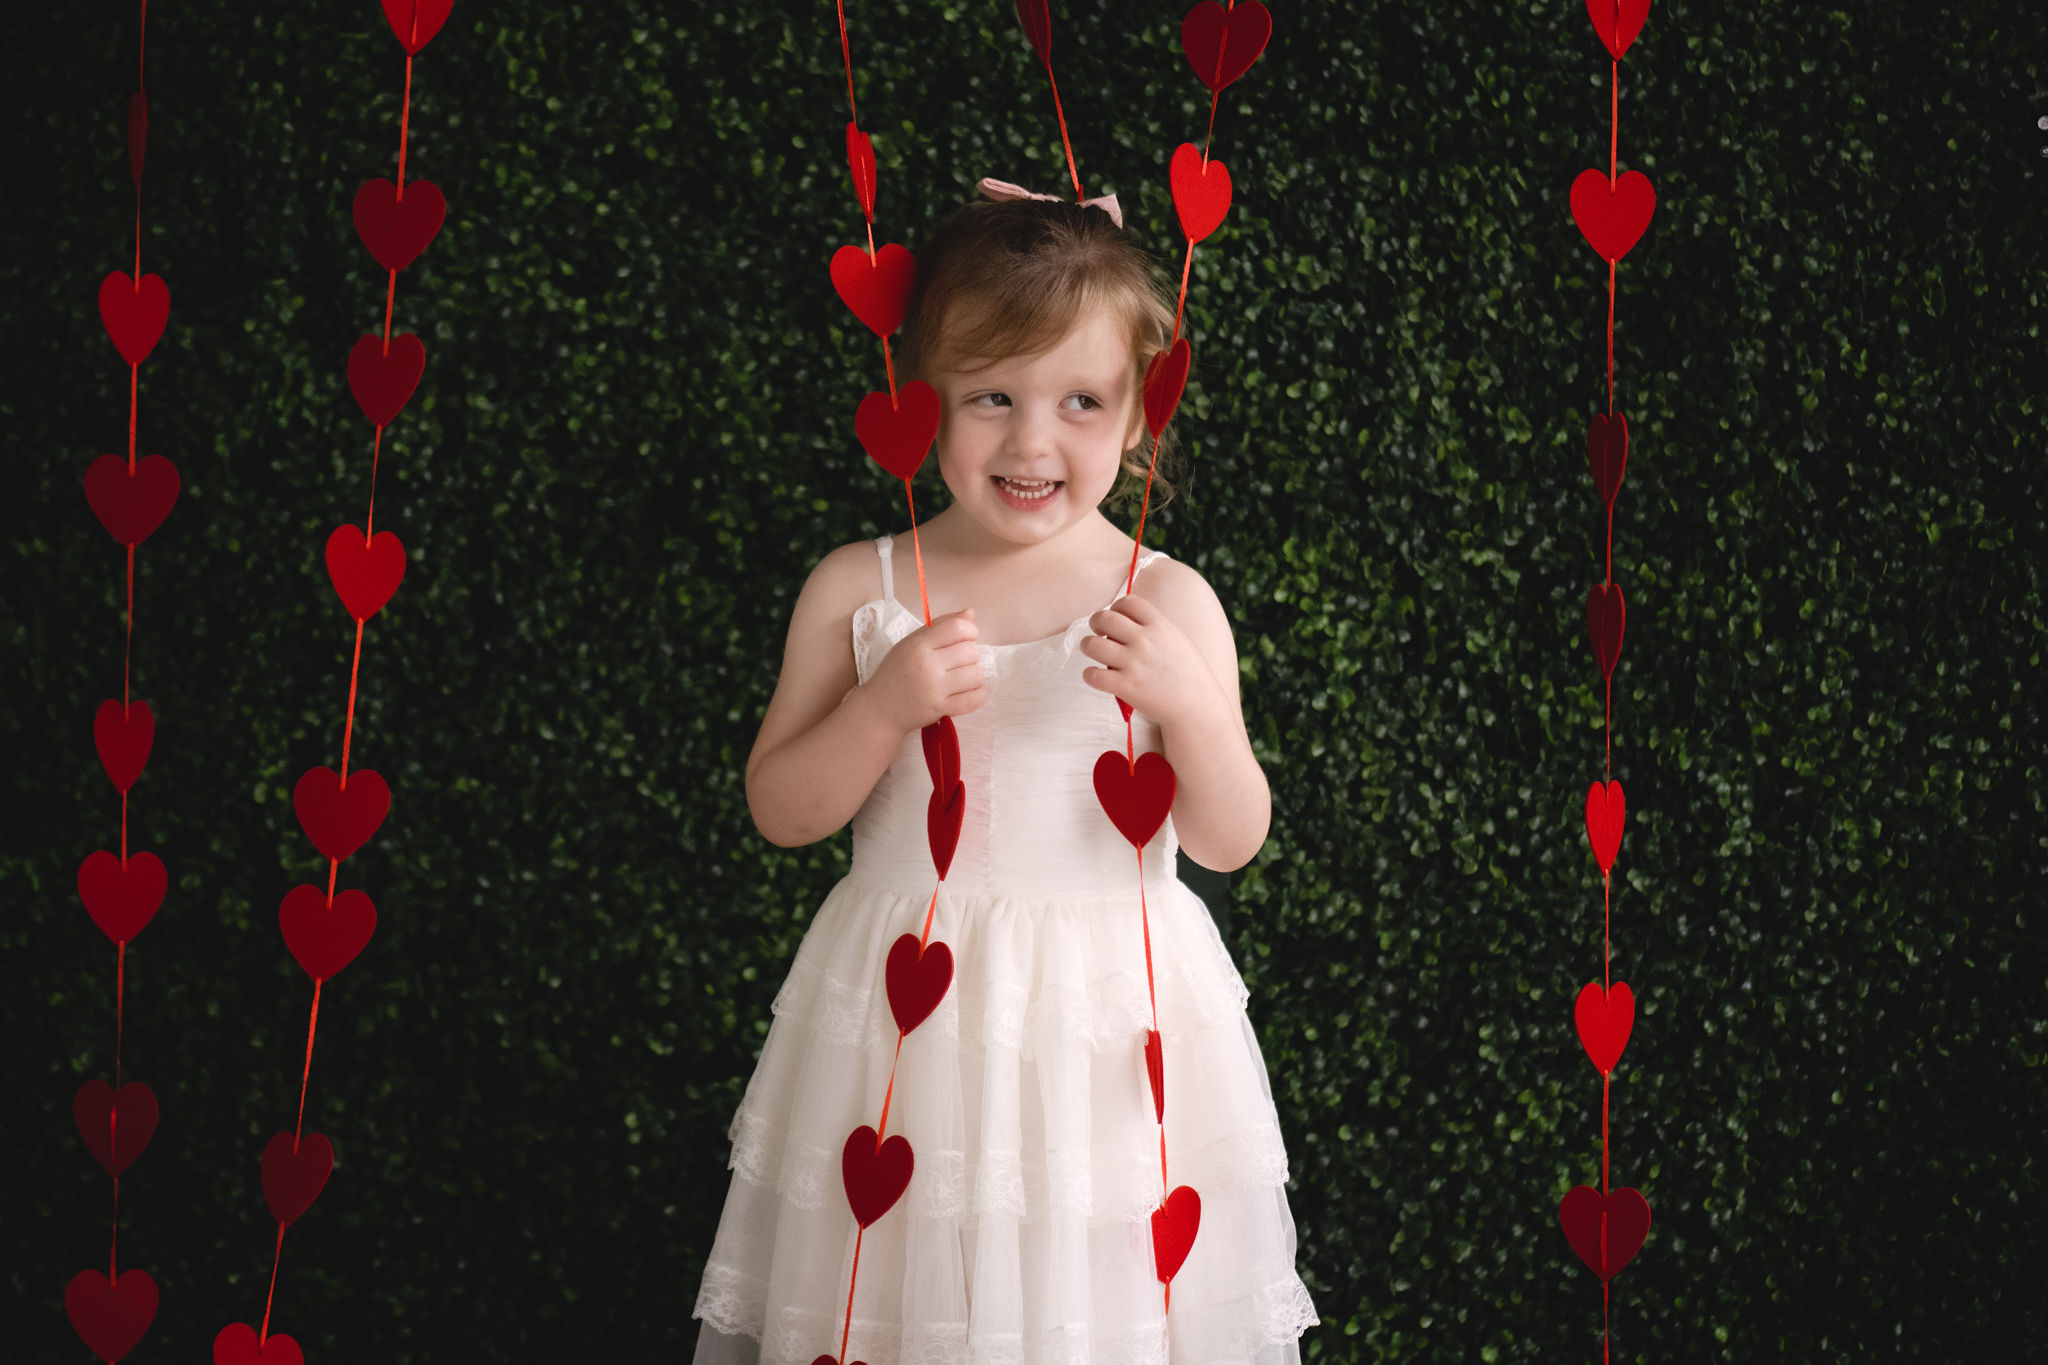 A young girl plays in some hanging heart decorations in front of a greenery wall in a white lace dress tampa toy stores